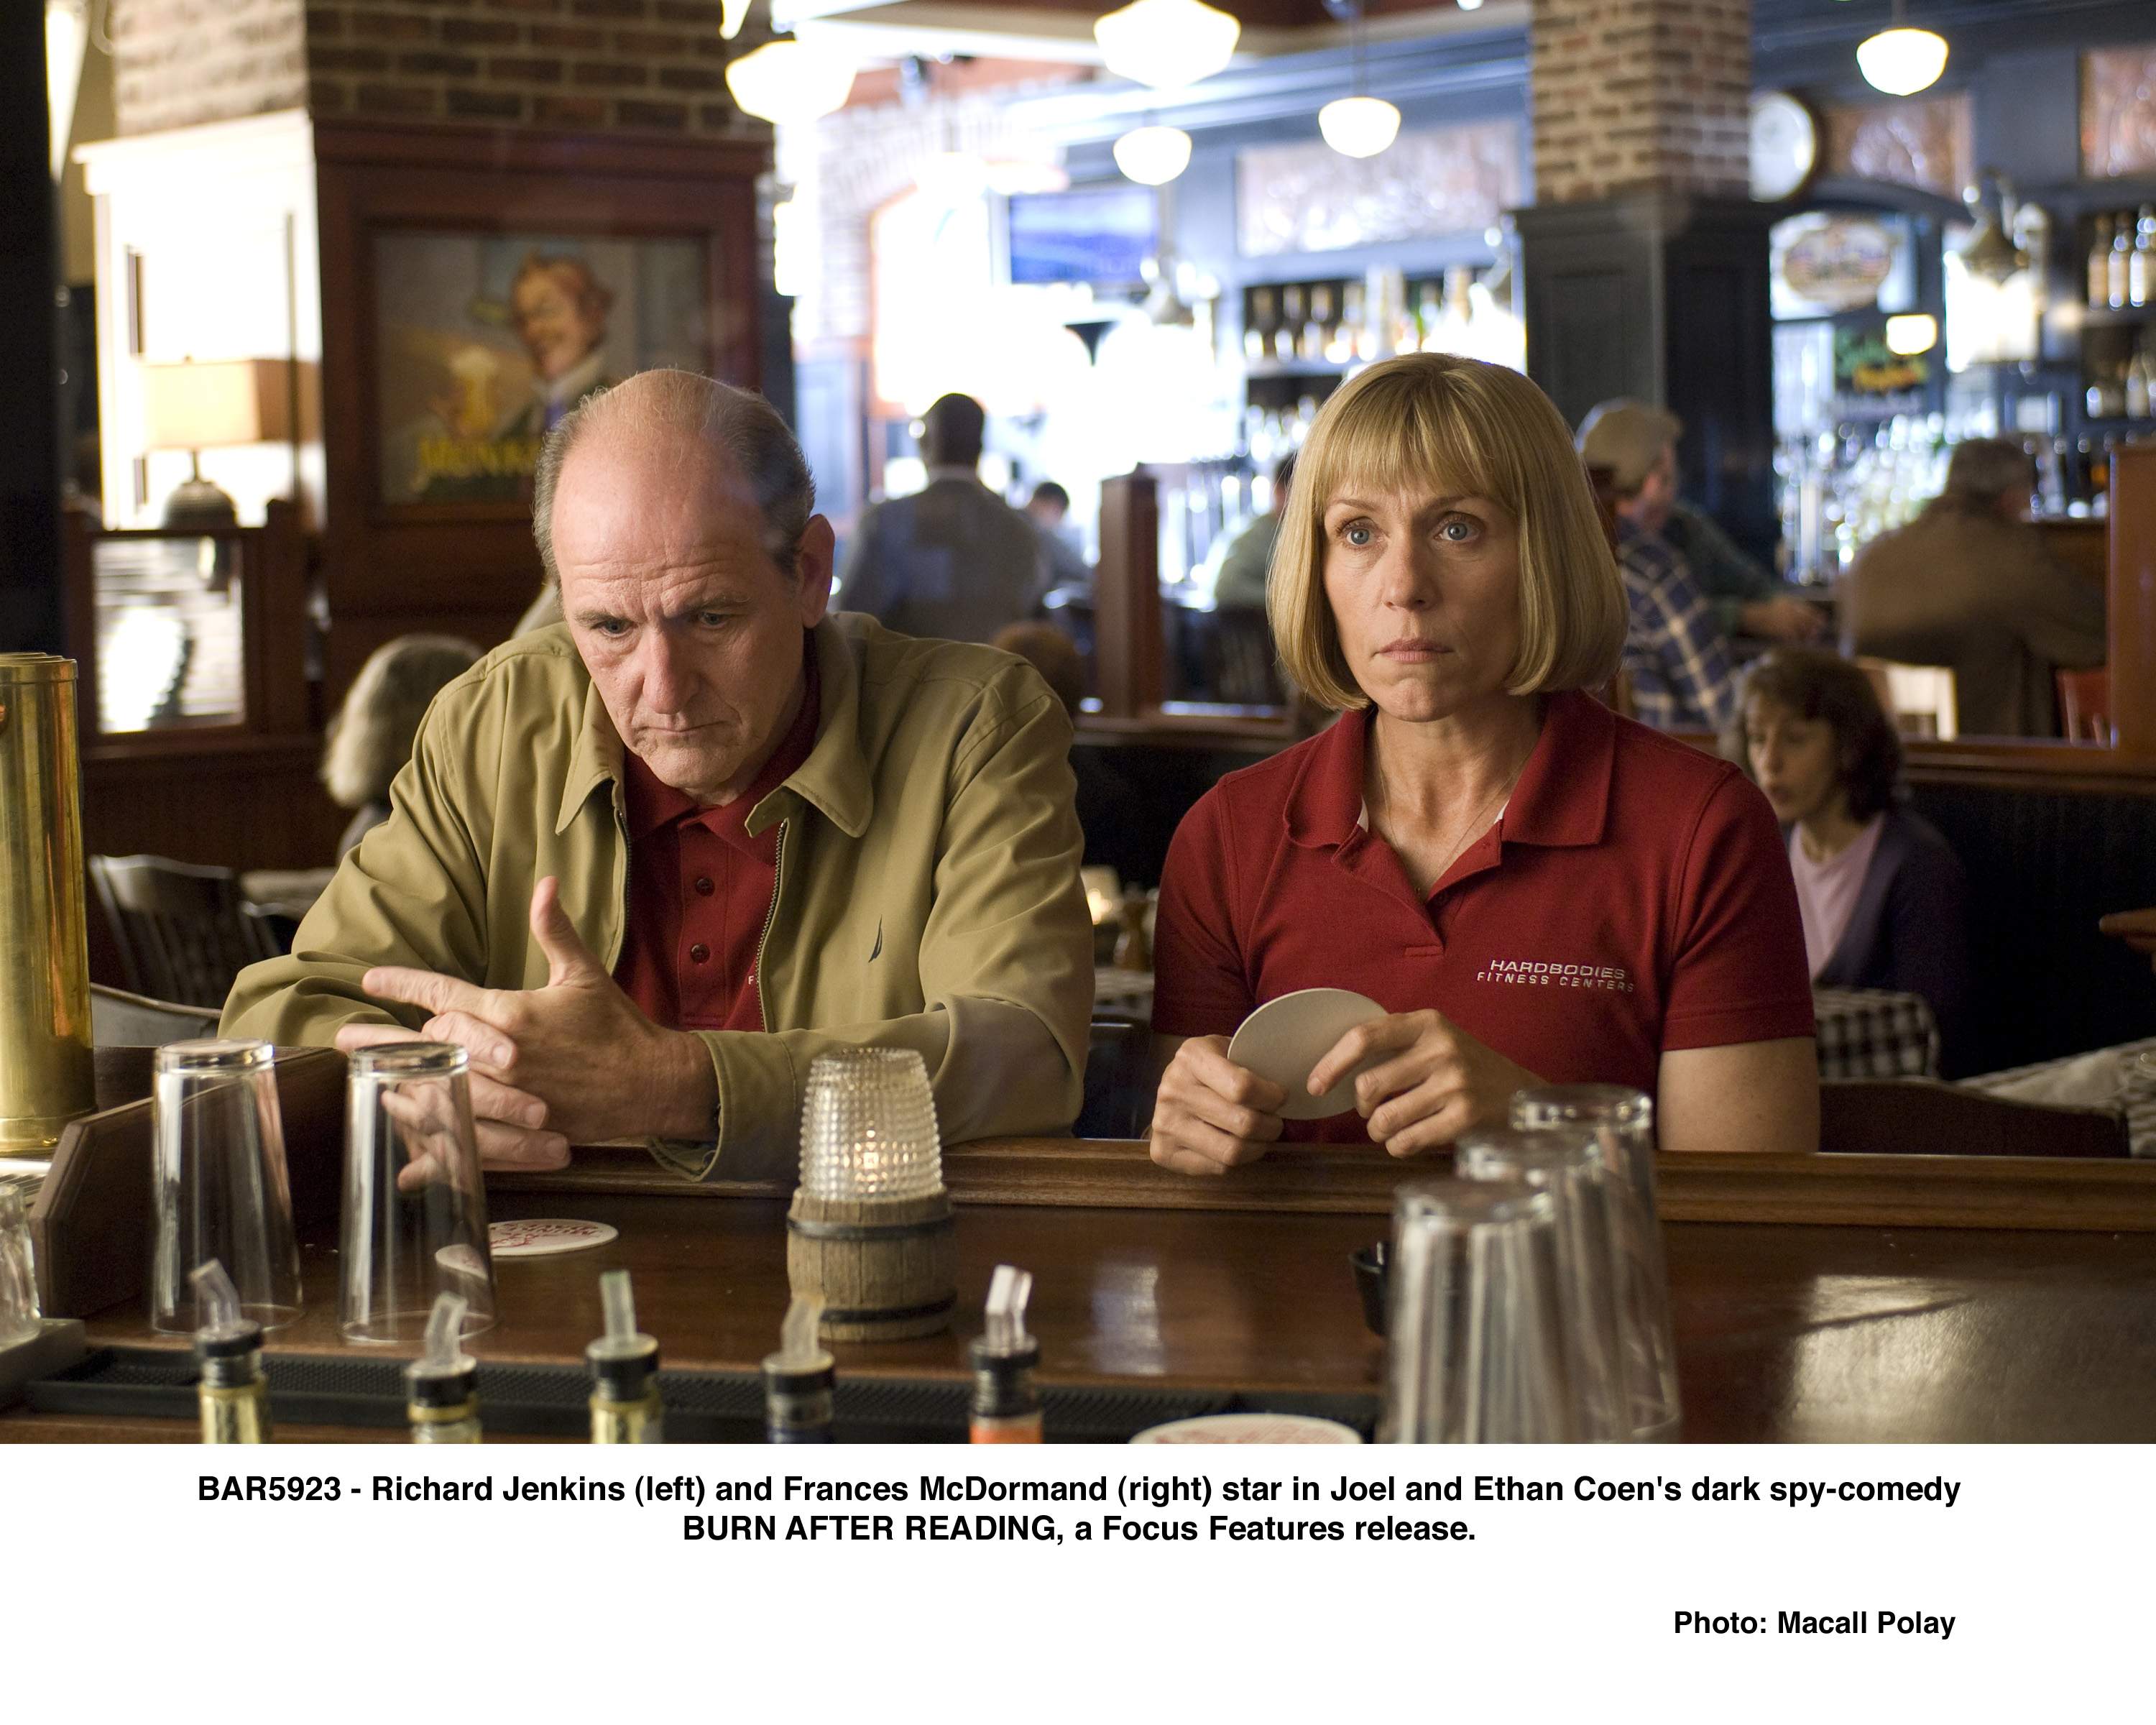 Richard Jenkins (left) and Frances McDormand (right) star in Joel and Ethan Coen's dark spy-comedy BURN AFTER READING, a Focus Features release.